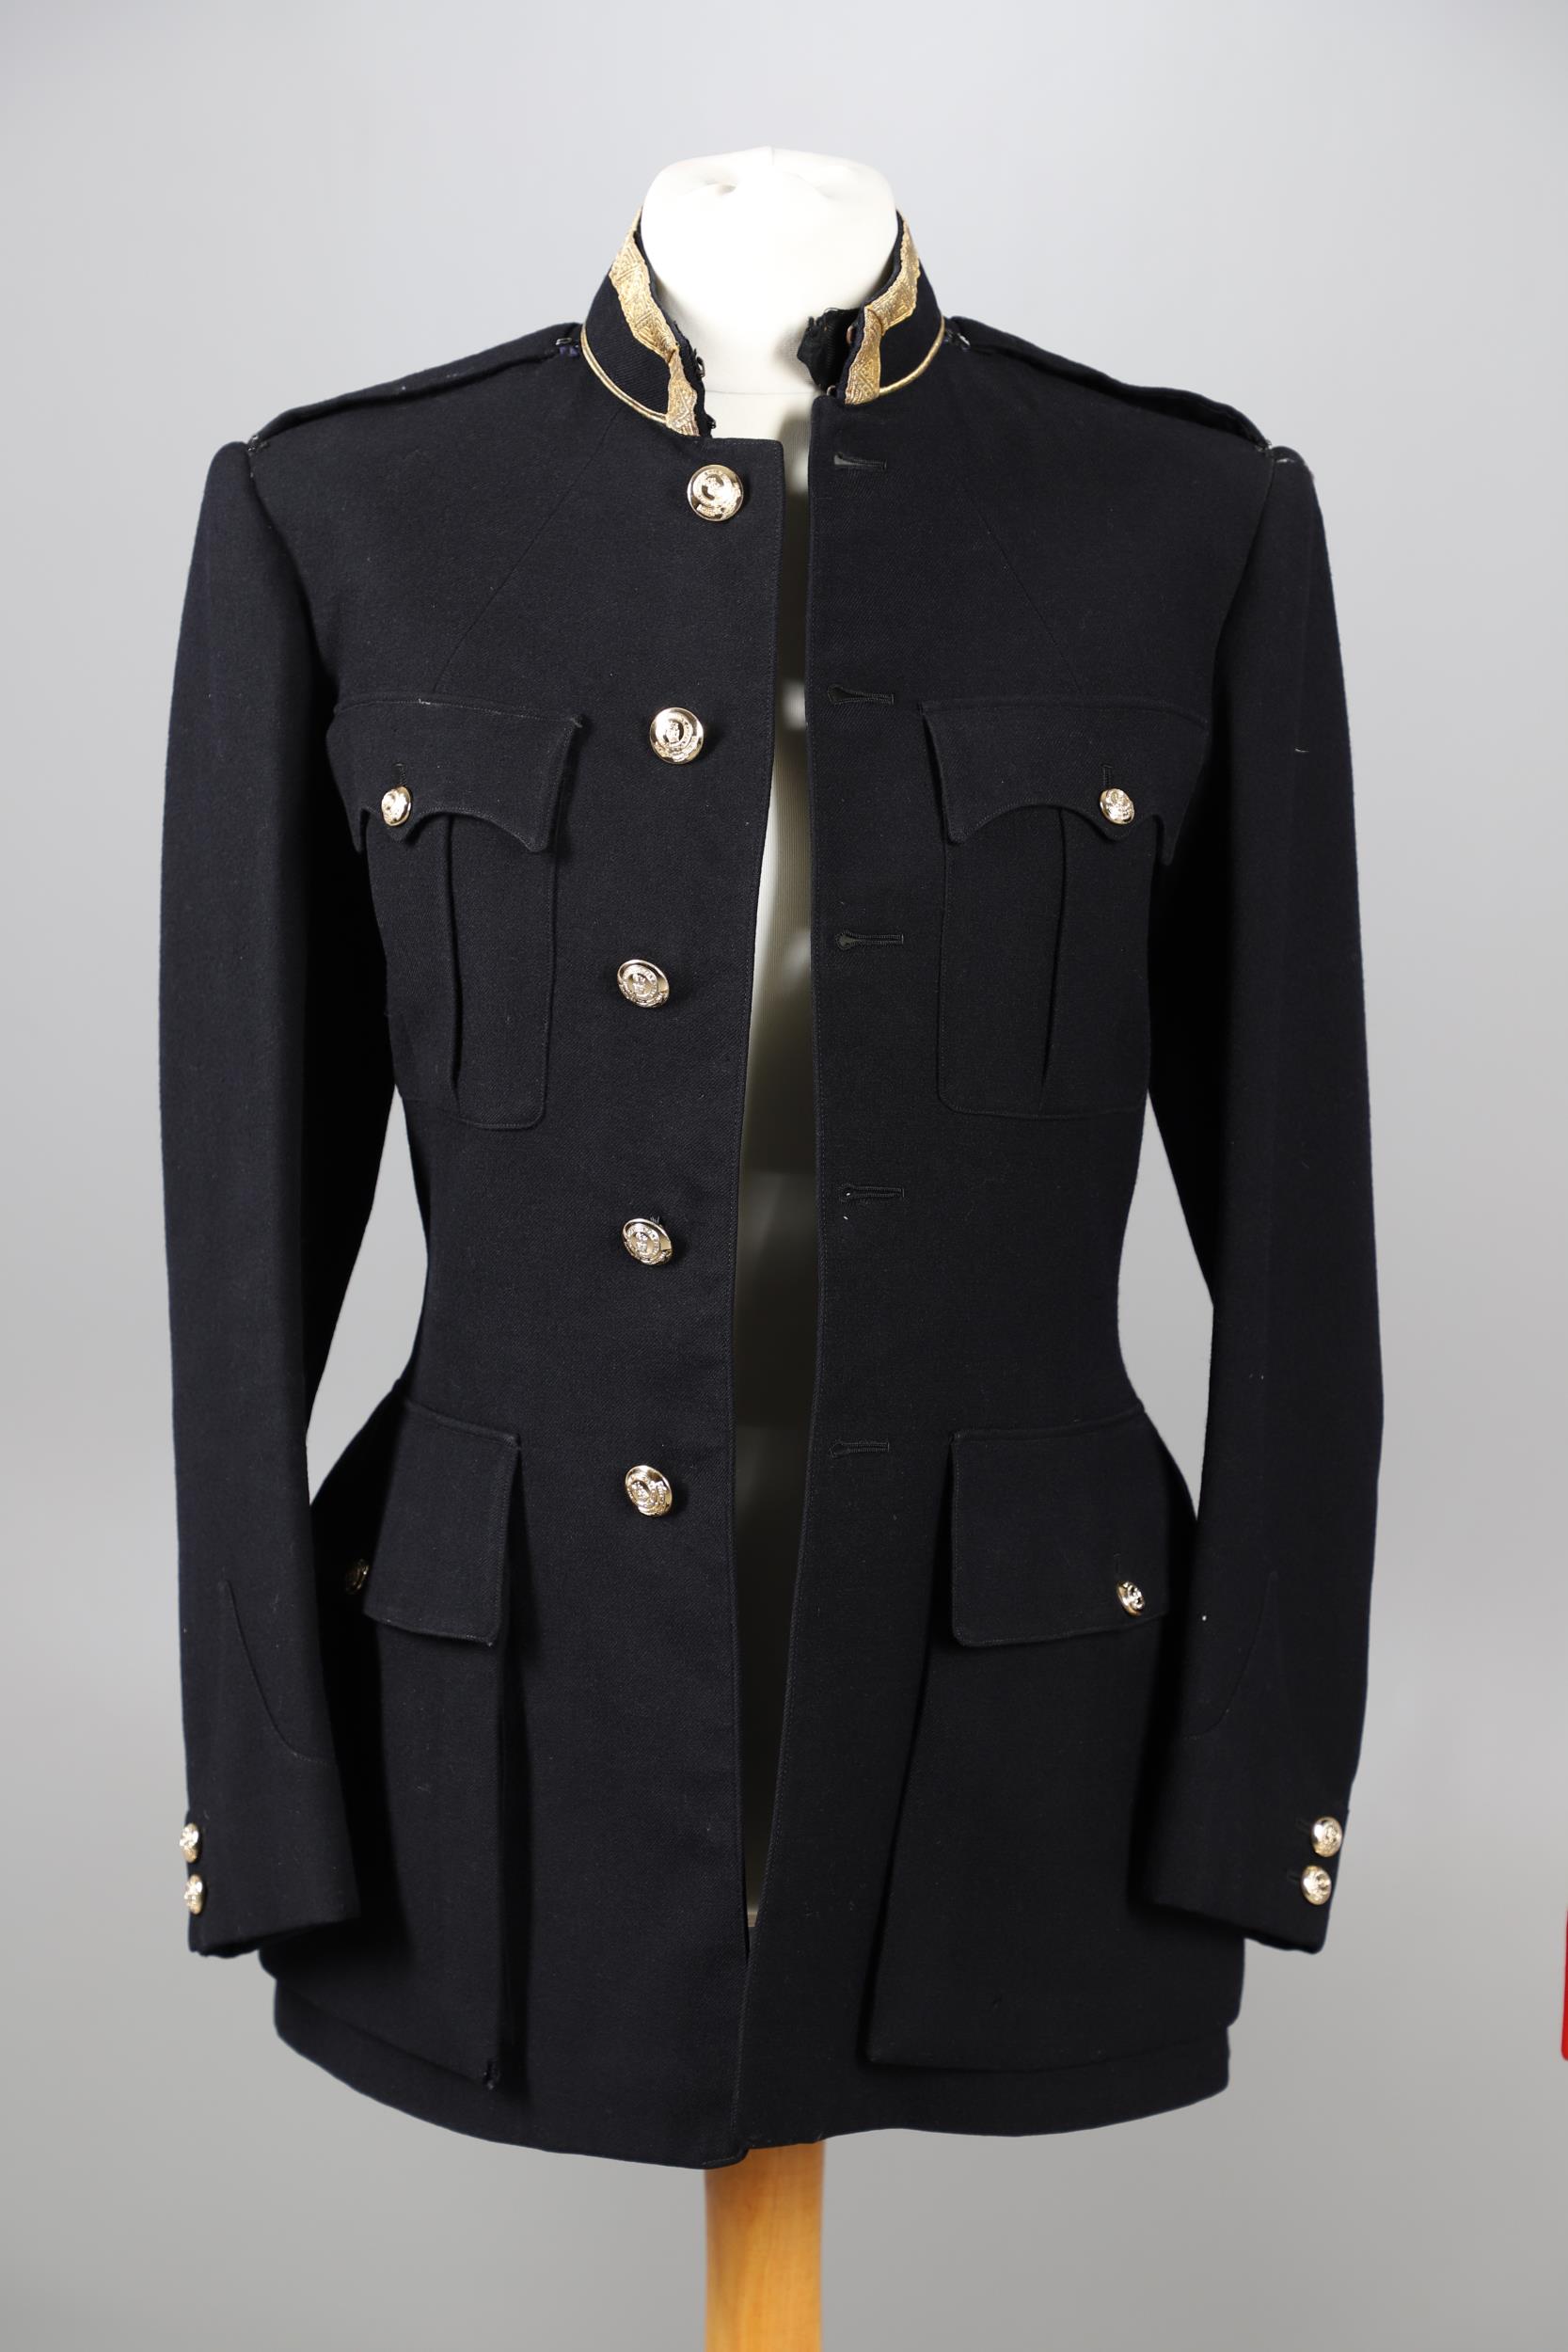 A POST SECOND WORLD WAR MESS JACKET AND BLUES UNIFORM FOR THE 15/19TH HUSSARS. - Image 2 of 34